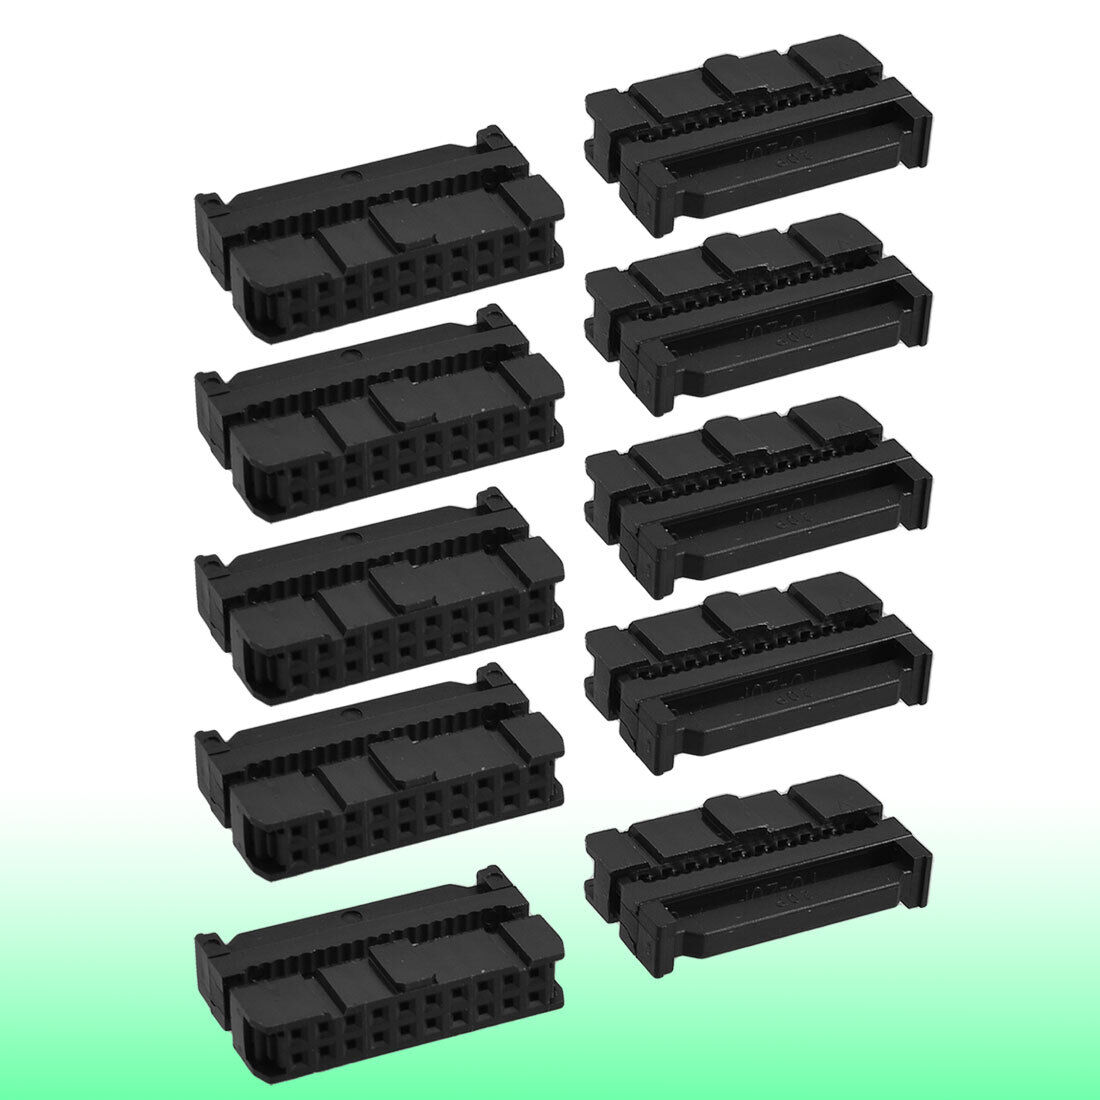 10 x 2.54mm Pitch Female 20 Pin Flat Cable IDC Socket Connector Black